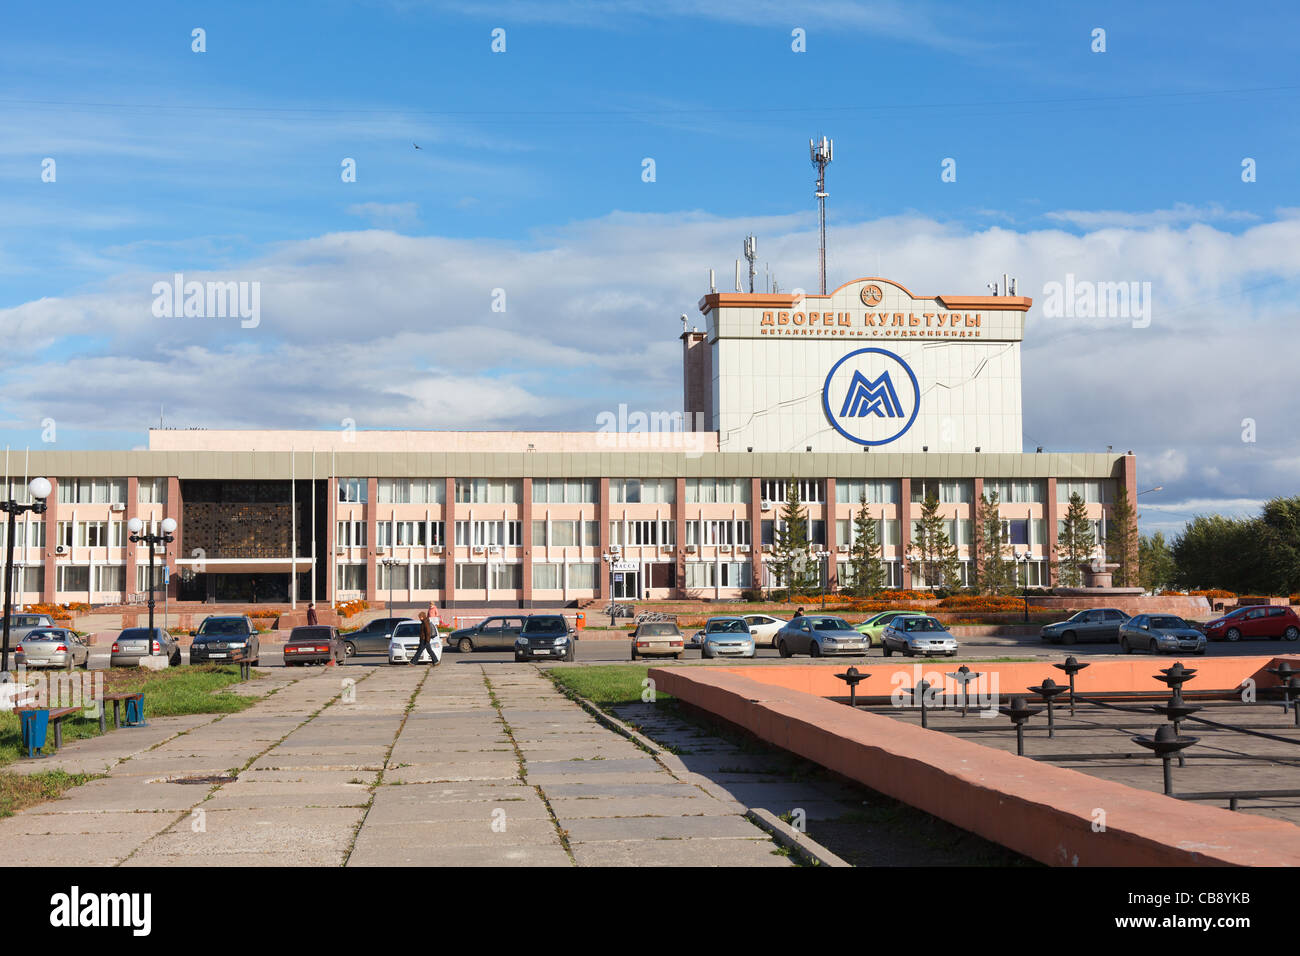 The building of houses of culture in the city of Ordzhonikidze Magnitogorsk, Russia Stock Photo